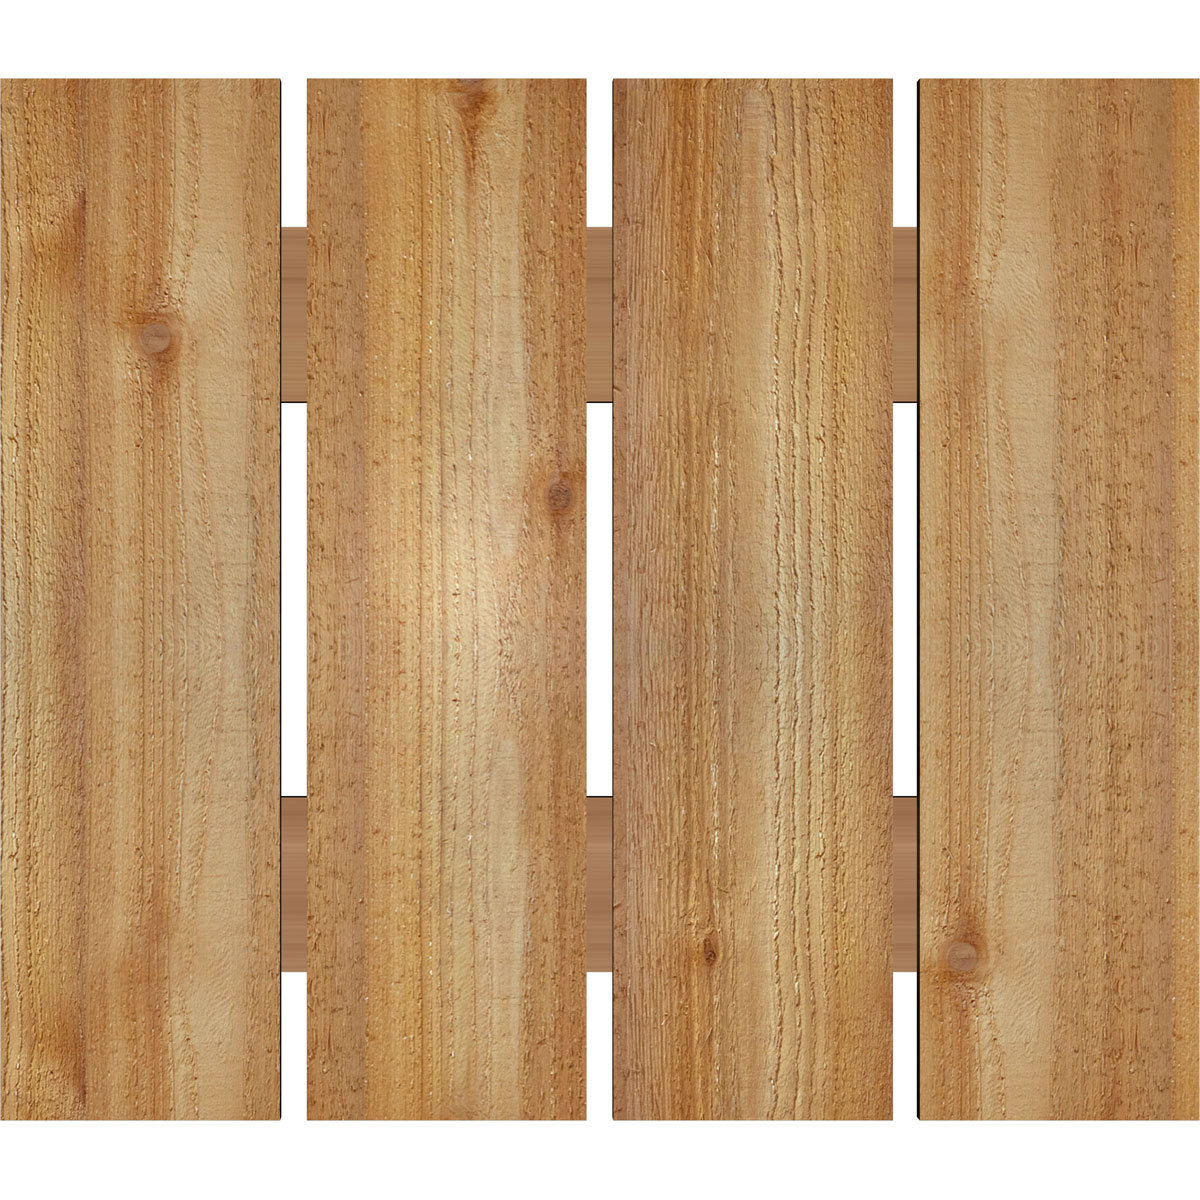 Ekena Millwork 2-Pack 23-in W x 20-in H Unfinished Board and Batten Spaced Wood Western Red cedar Exterior Shutters